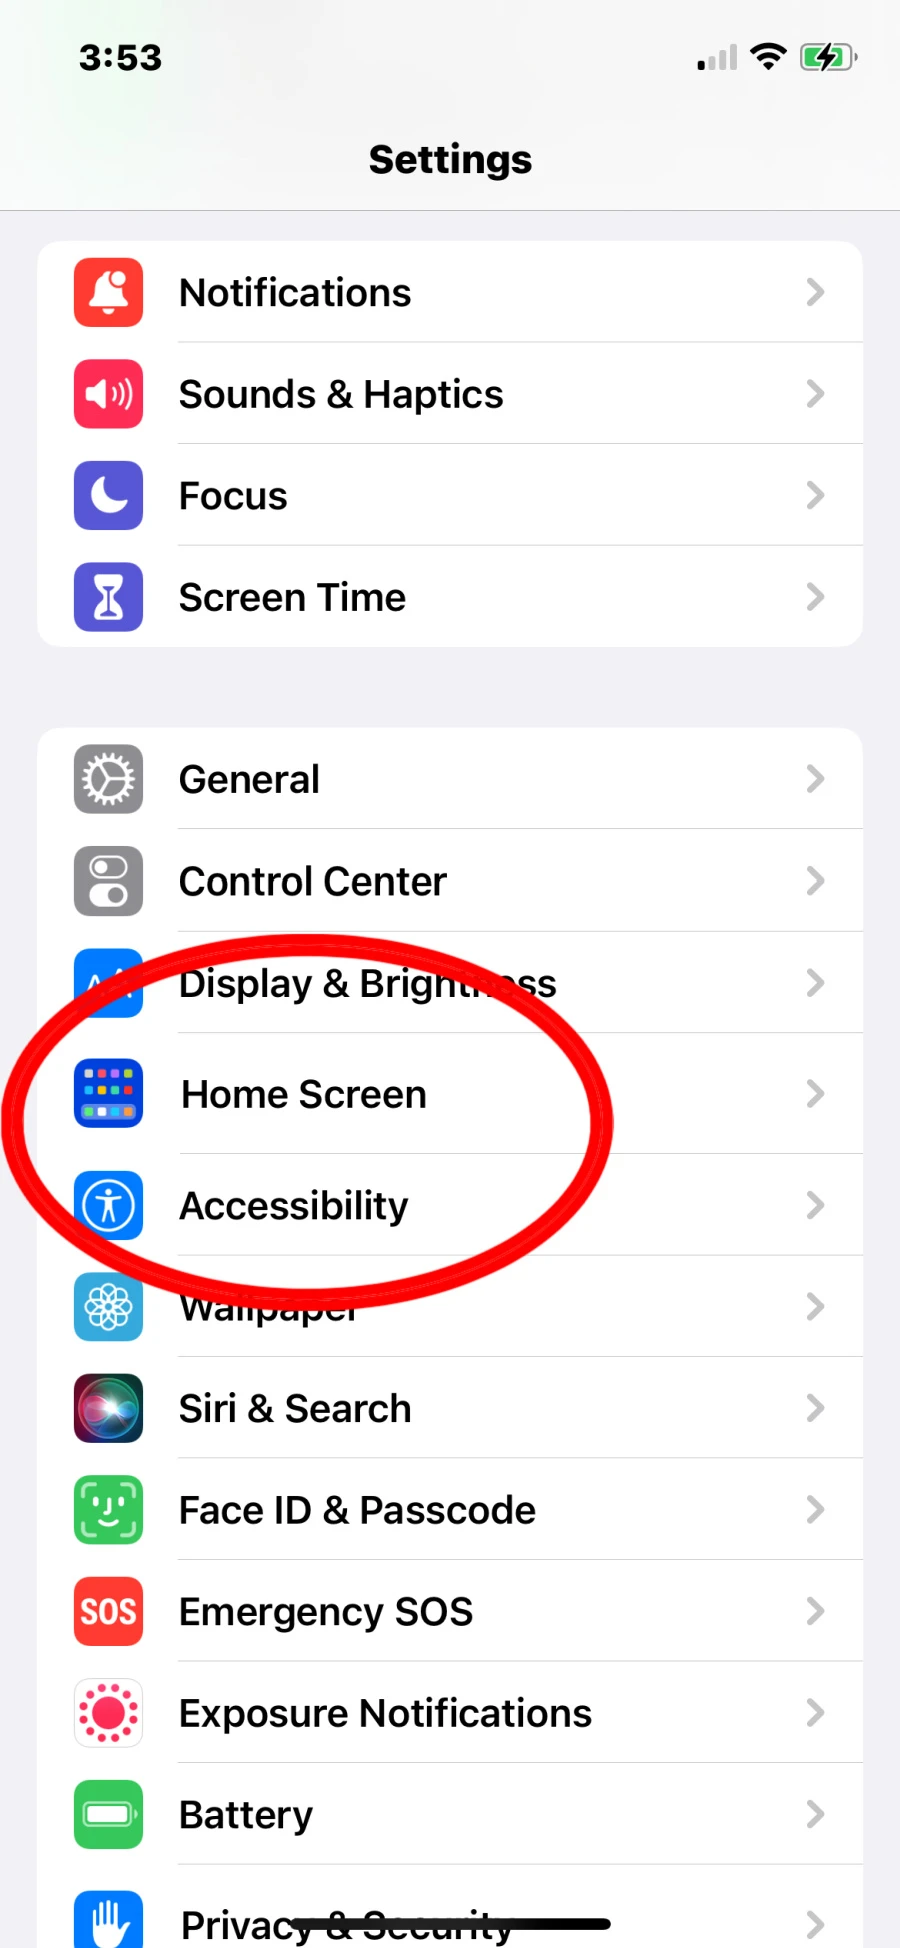 How to Remove the Search Button from Your Home Screen in iOS 16